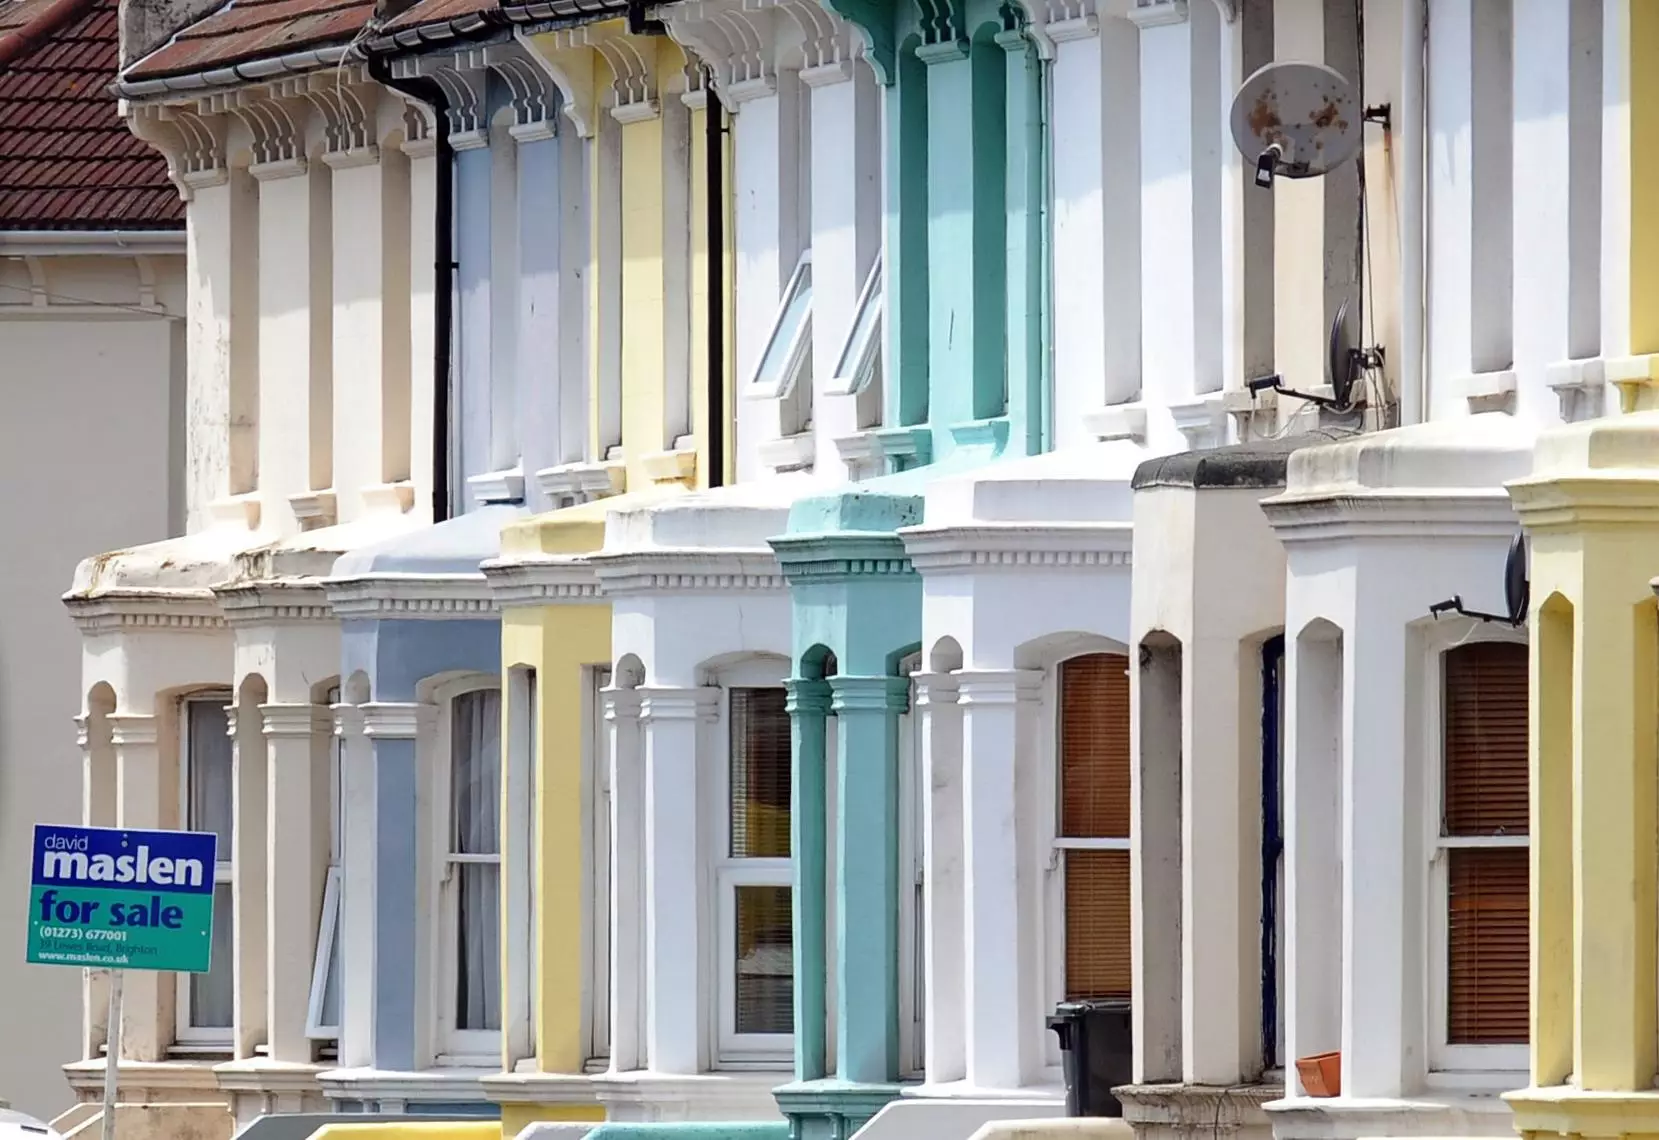 The national average price of property has also hit an all-time high of £327,797 (